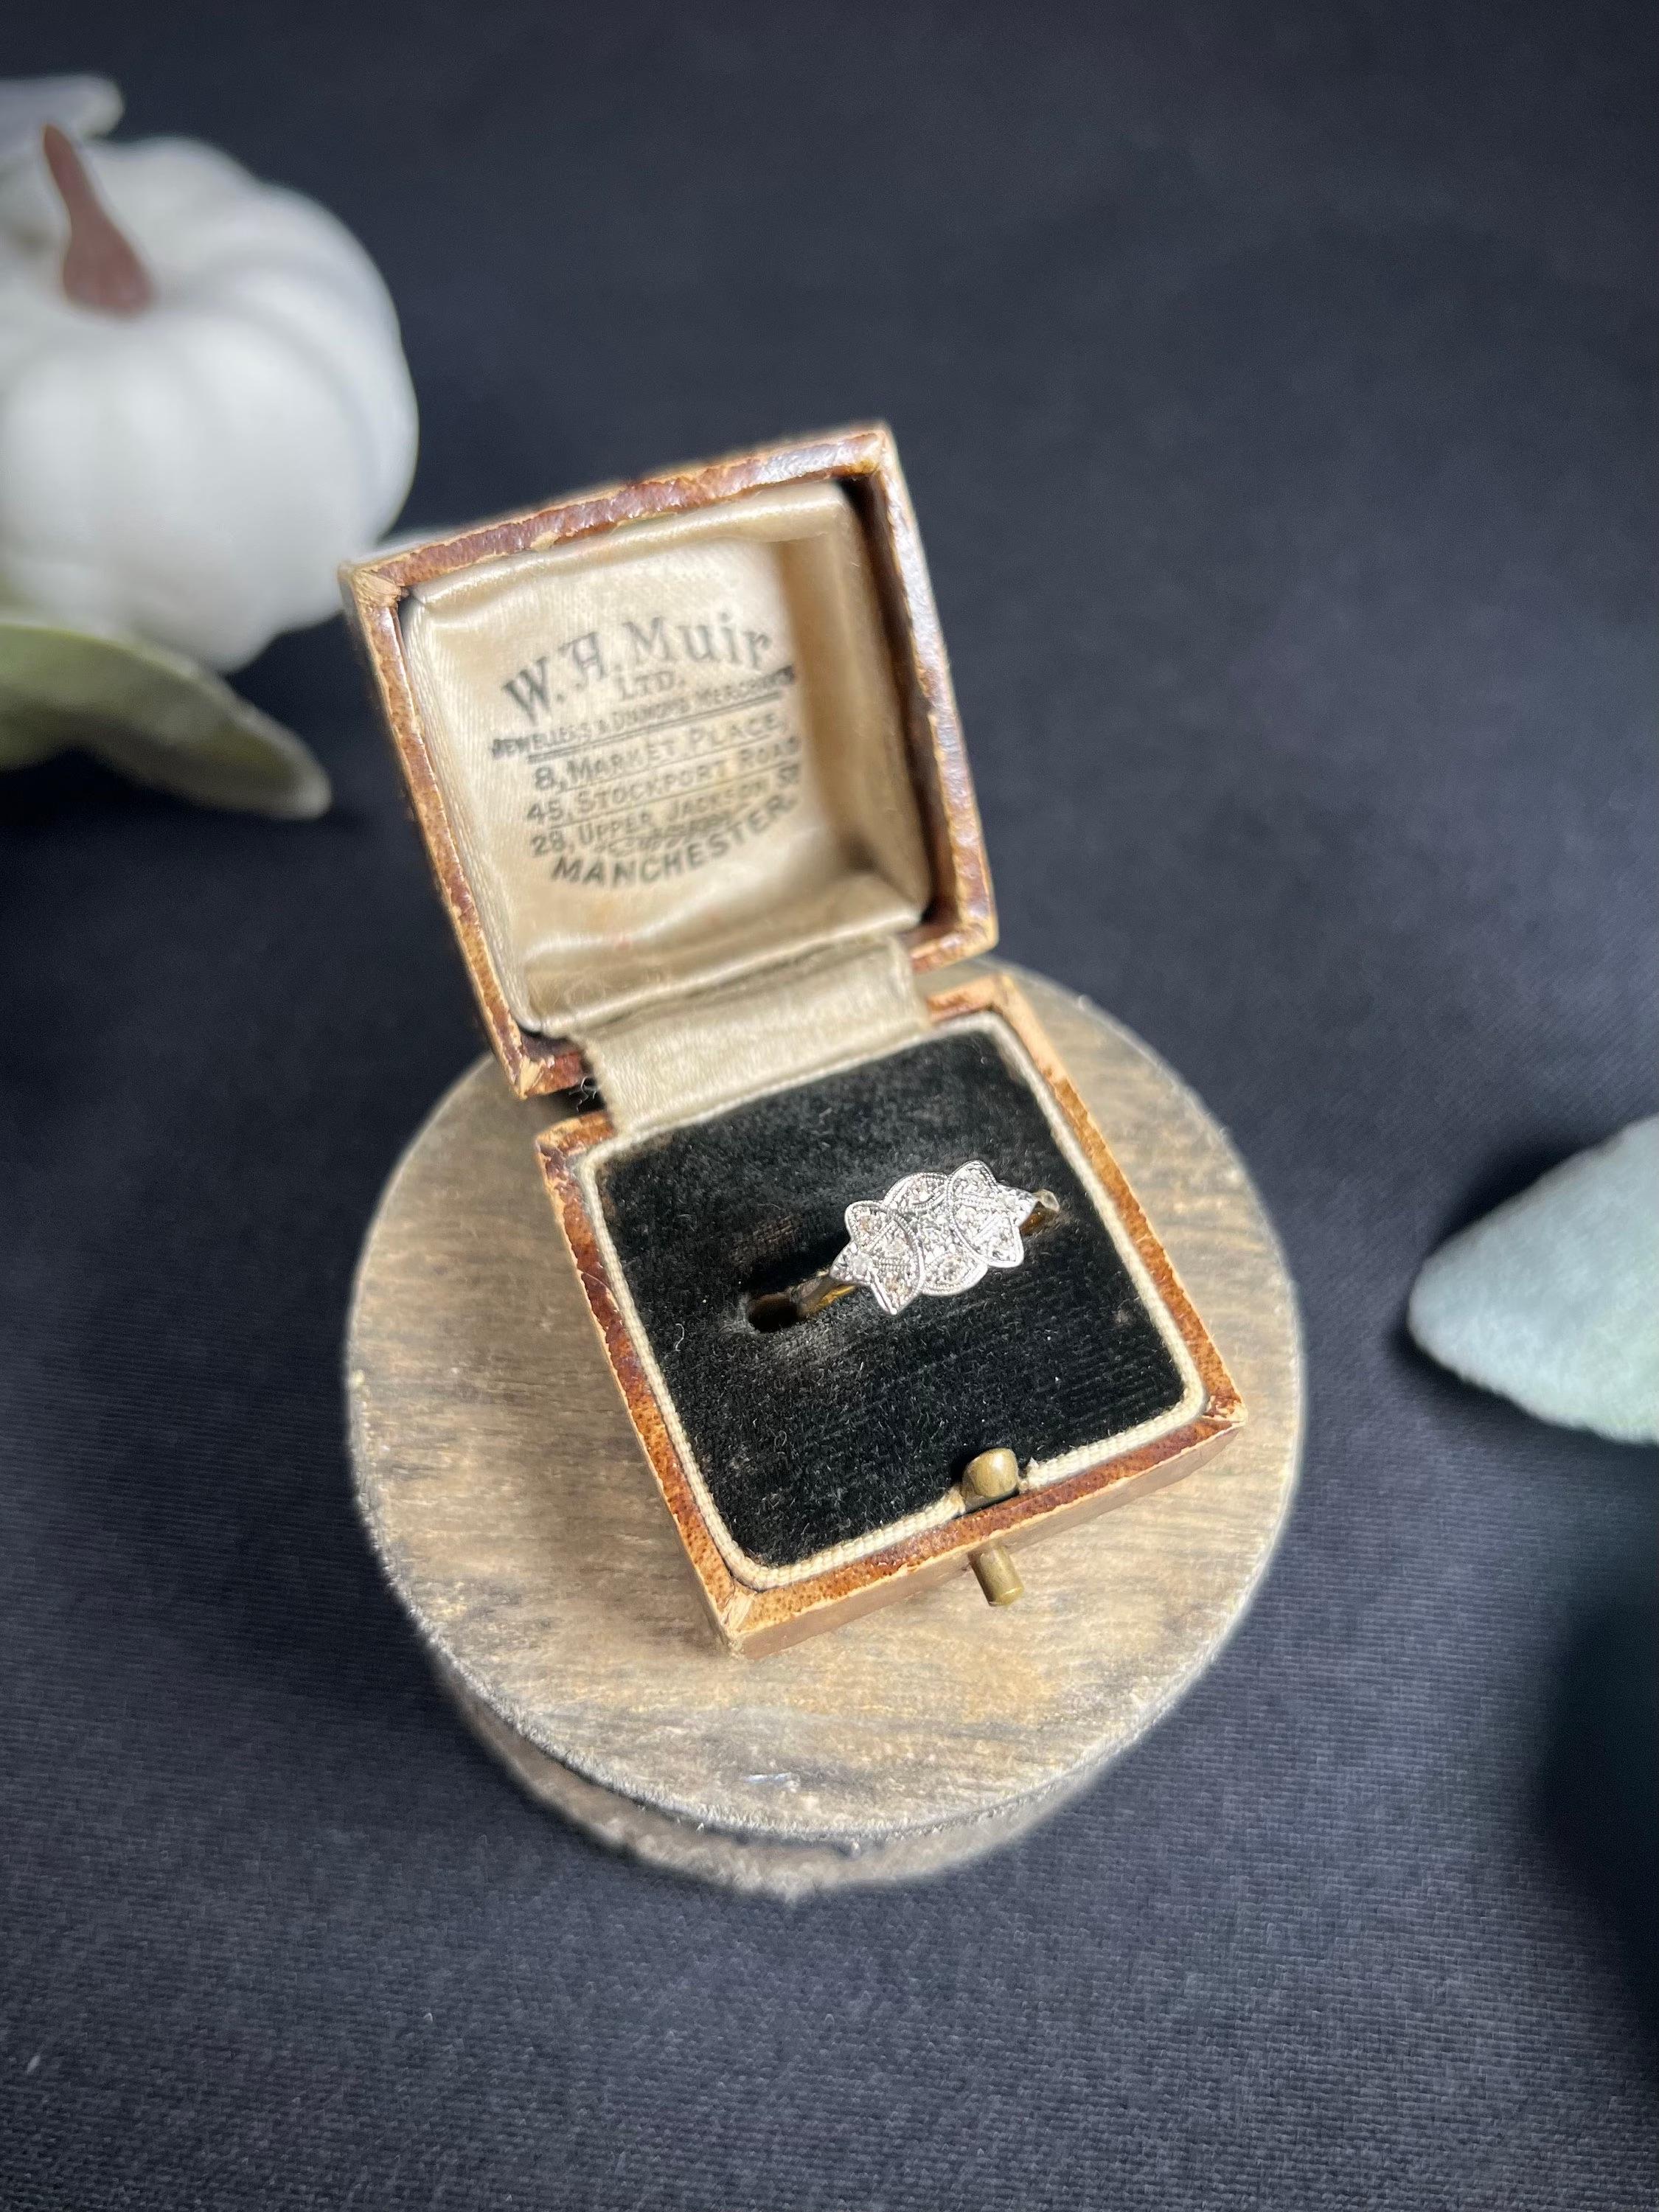 Antique Diamond Illusion Ring 

18ct Gold & Platinum Stamped

Circa 1910

Makers Mark H & S

This stunning Edwardian ring boasts a timeless design that is sure to turn heads. Crafted from 18ct gold and platinum, the ring features a beautiful